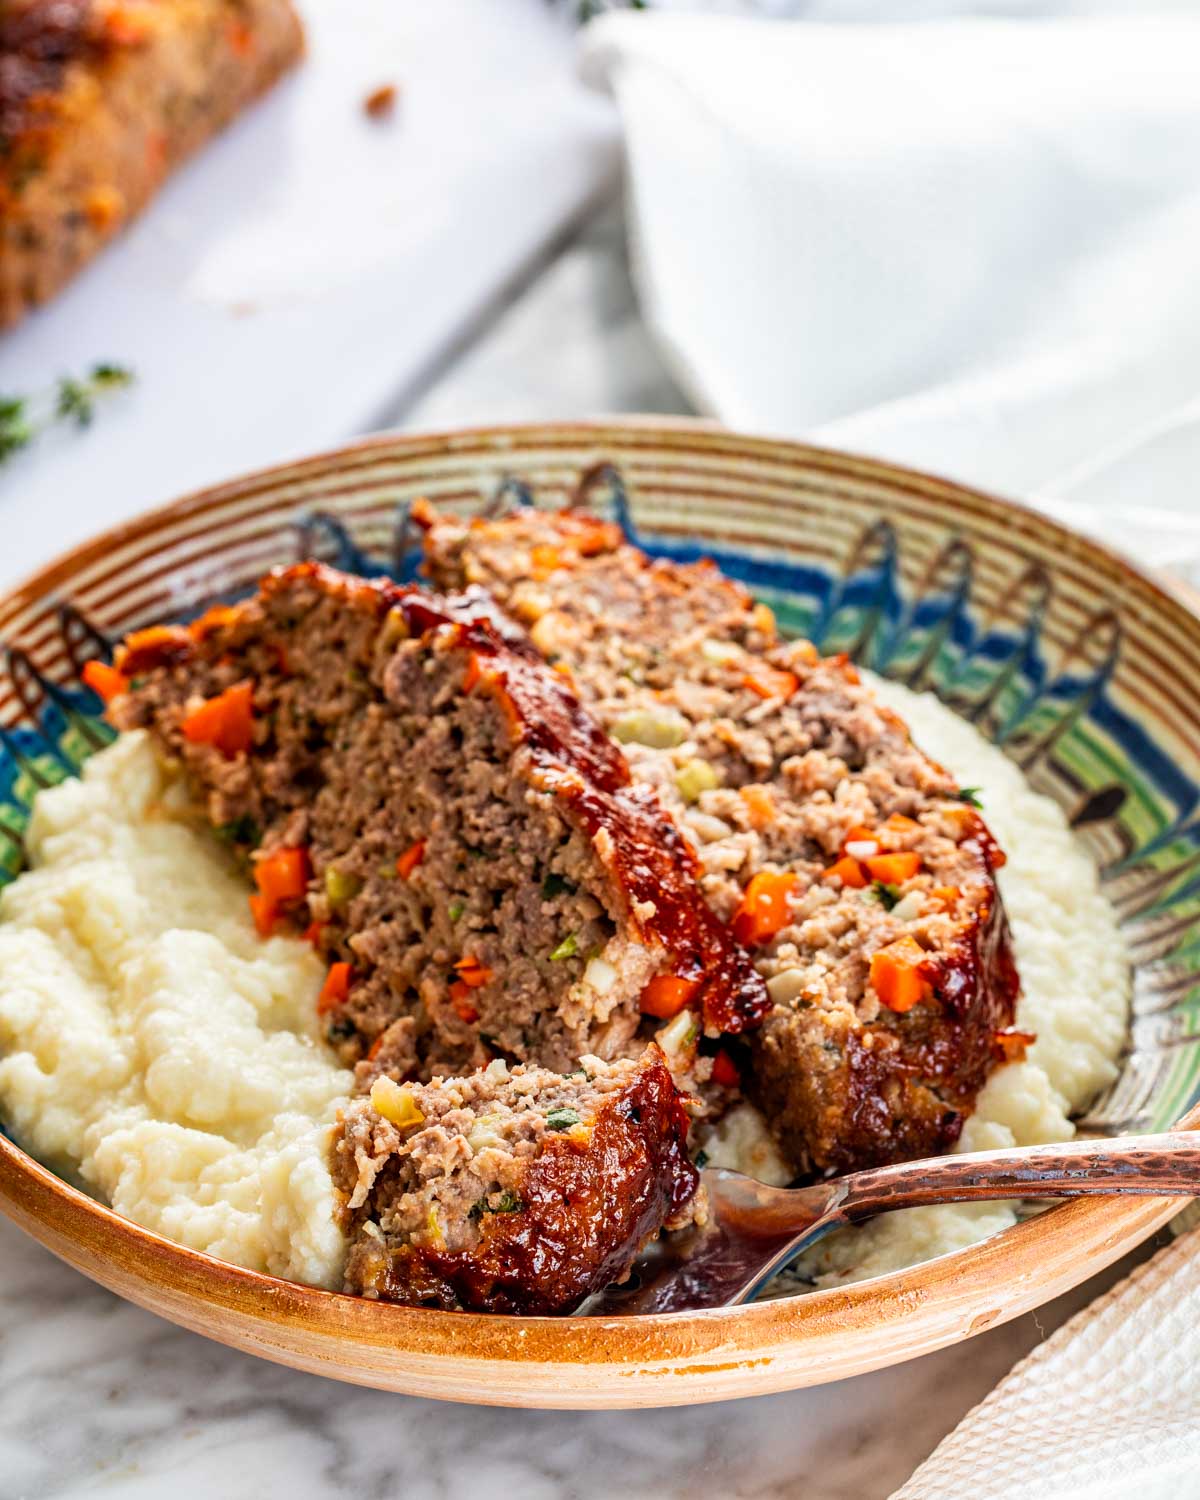 two slices of meatloaf over a bed of mashed cauliflower.